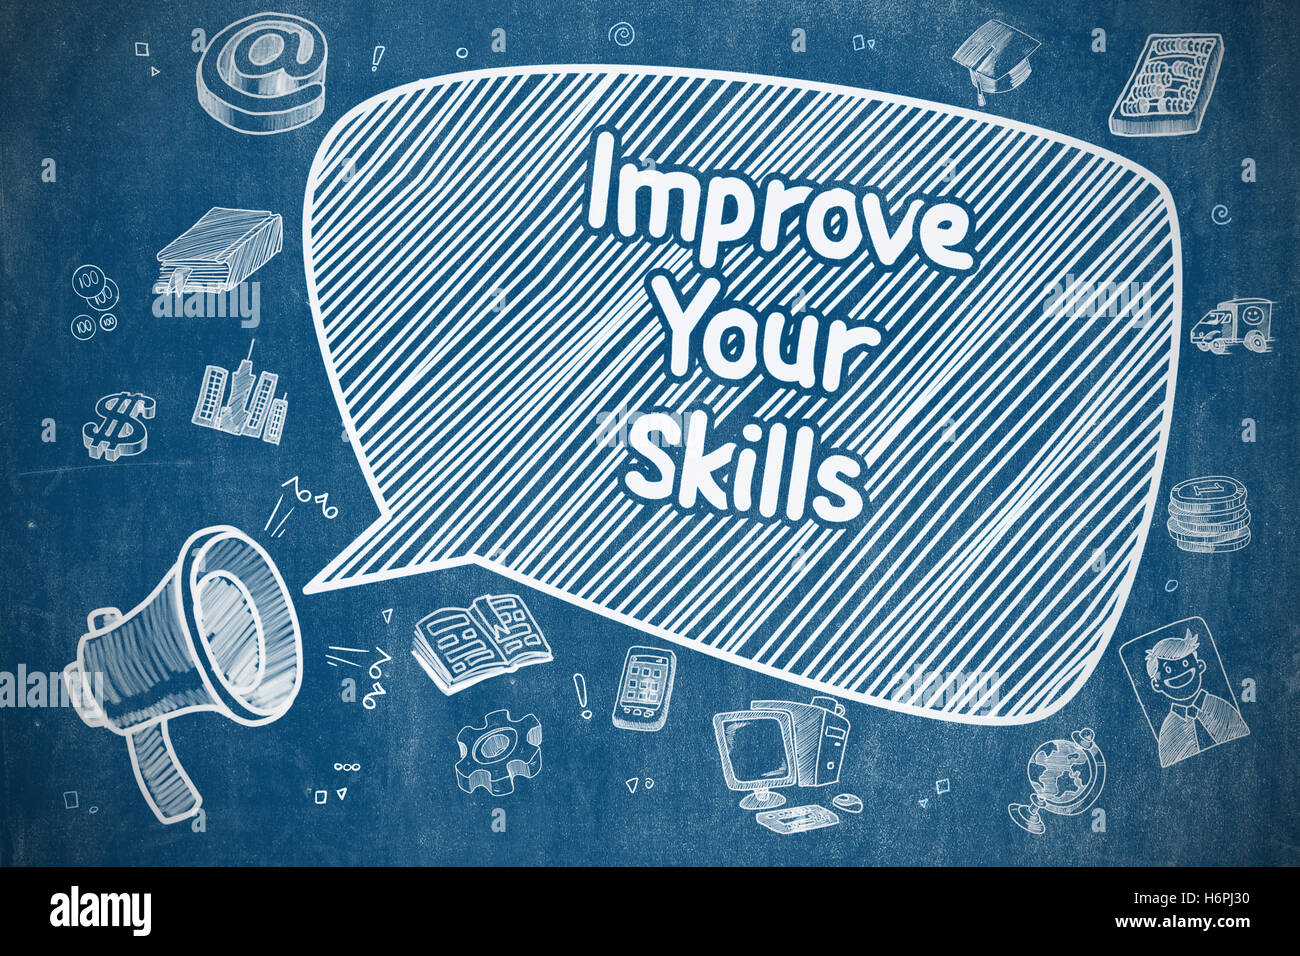 Improve Your Skills - Business Concept. Stock Photo